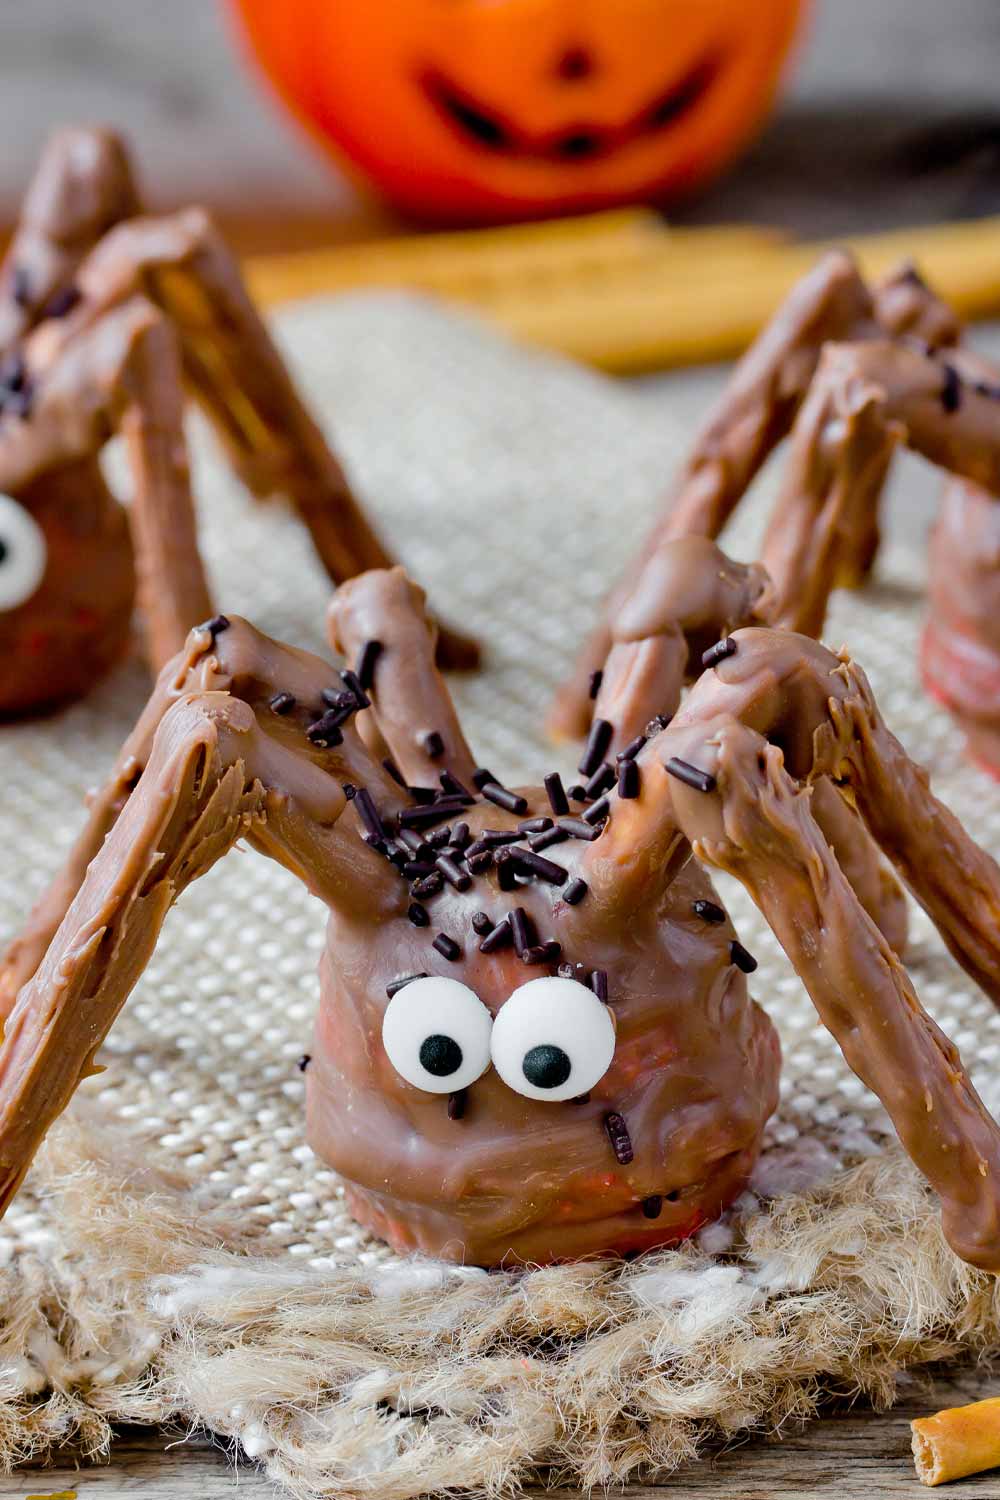 Chocolate Spiders